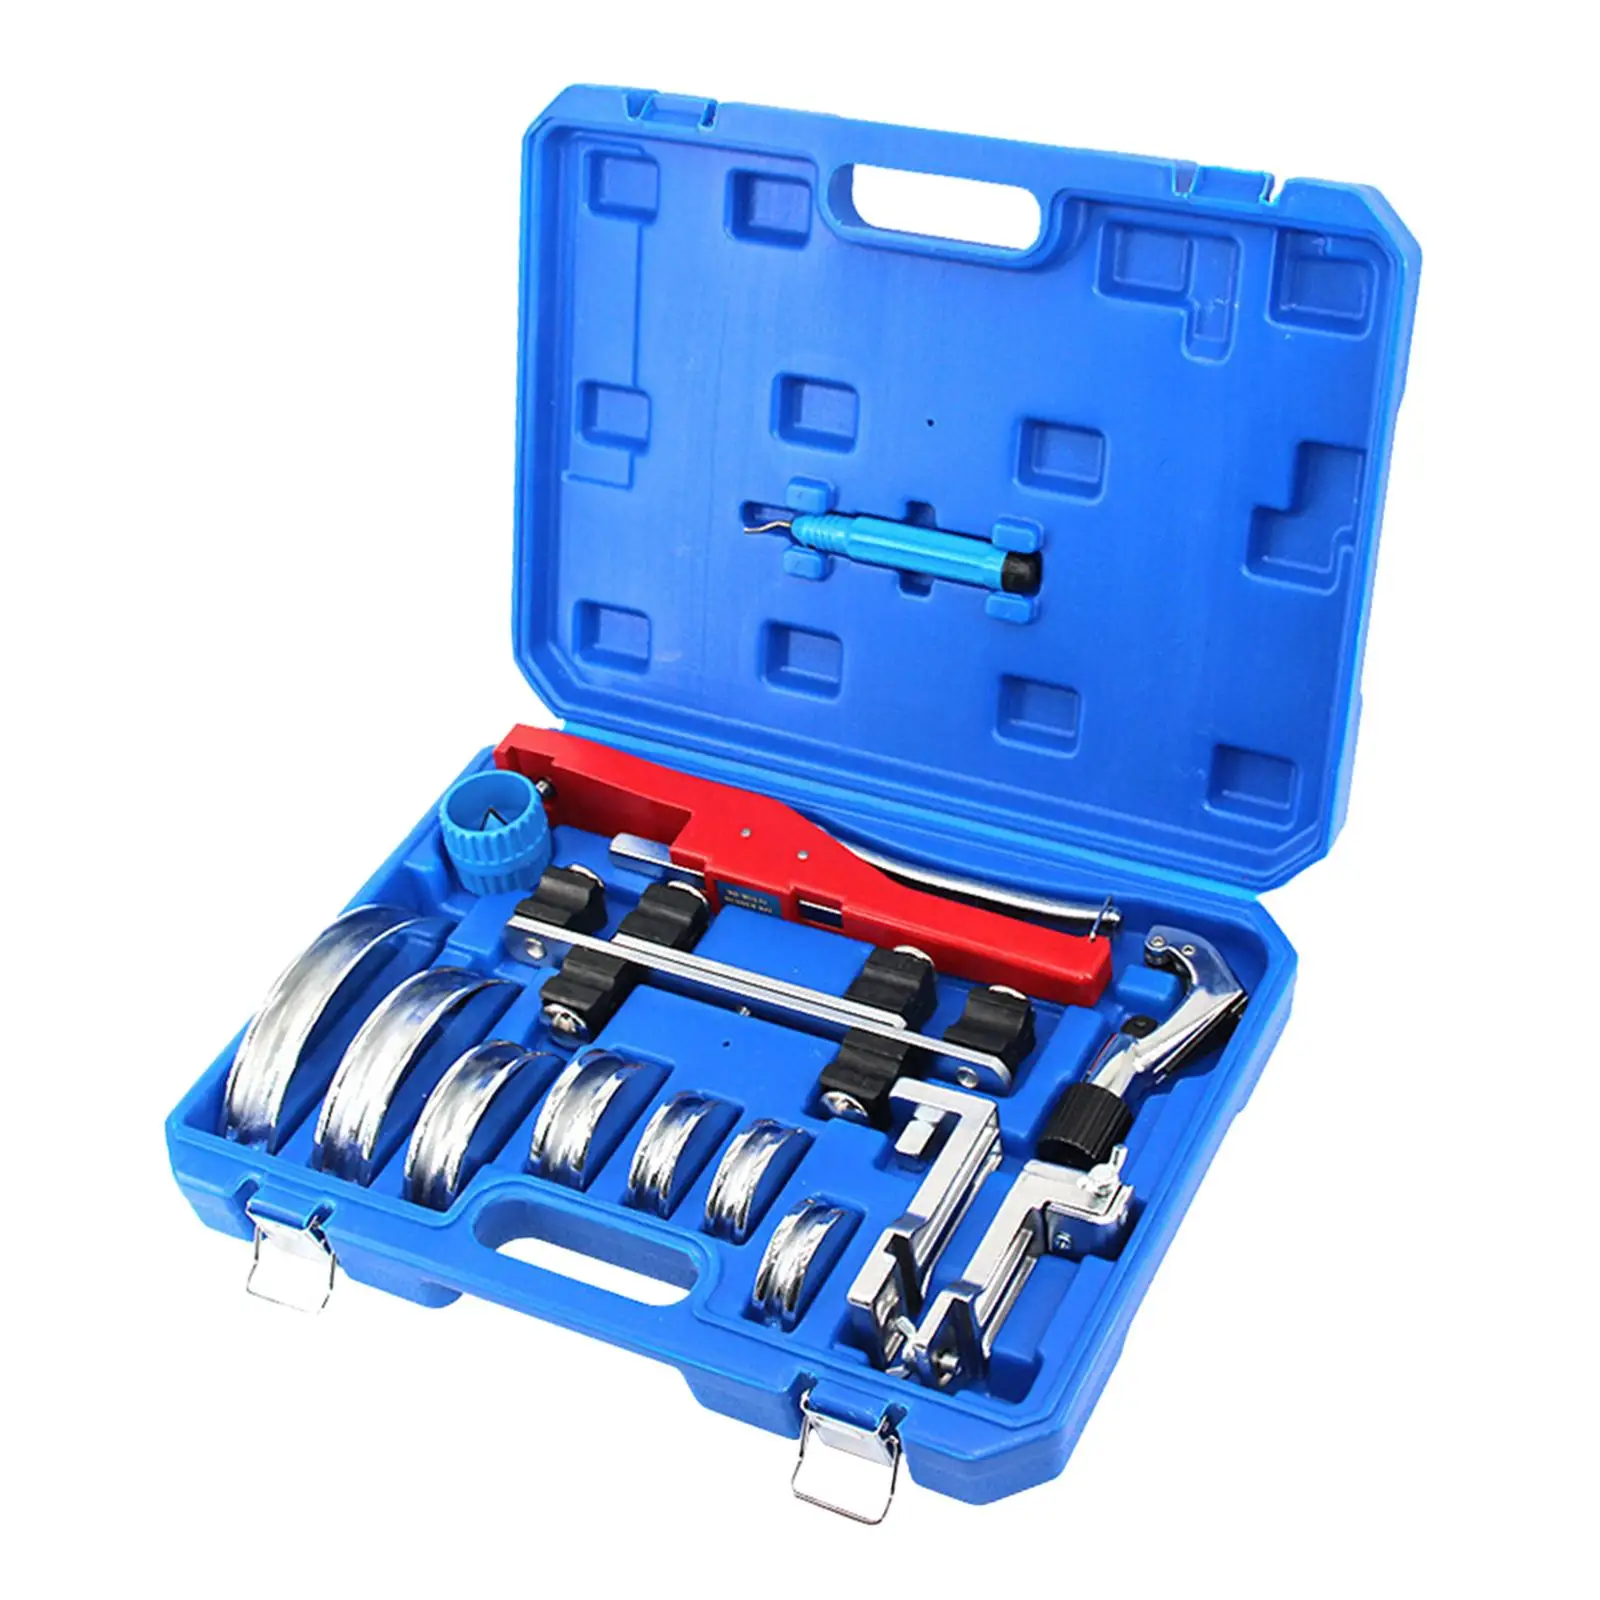 Tube Pipe Bender Refrigeration Ratcheting Tubing Benders 6-22mm Durable with Tube Cutter Multifunctional for Hydraulic Systems